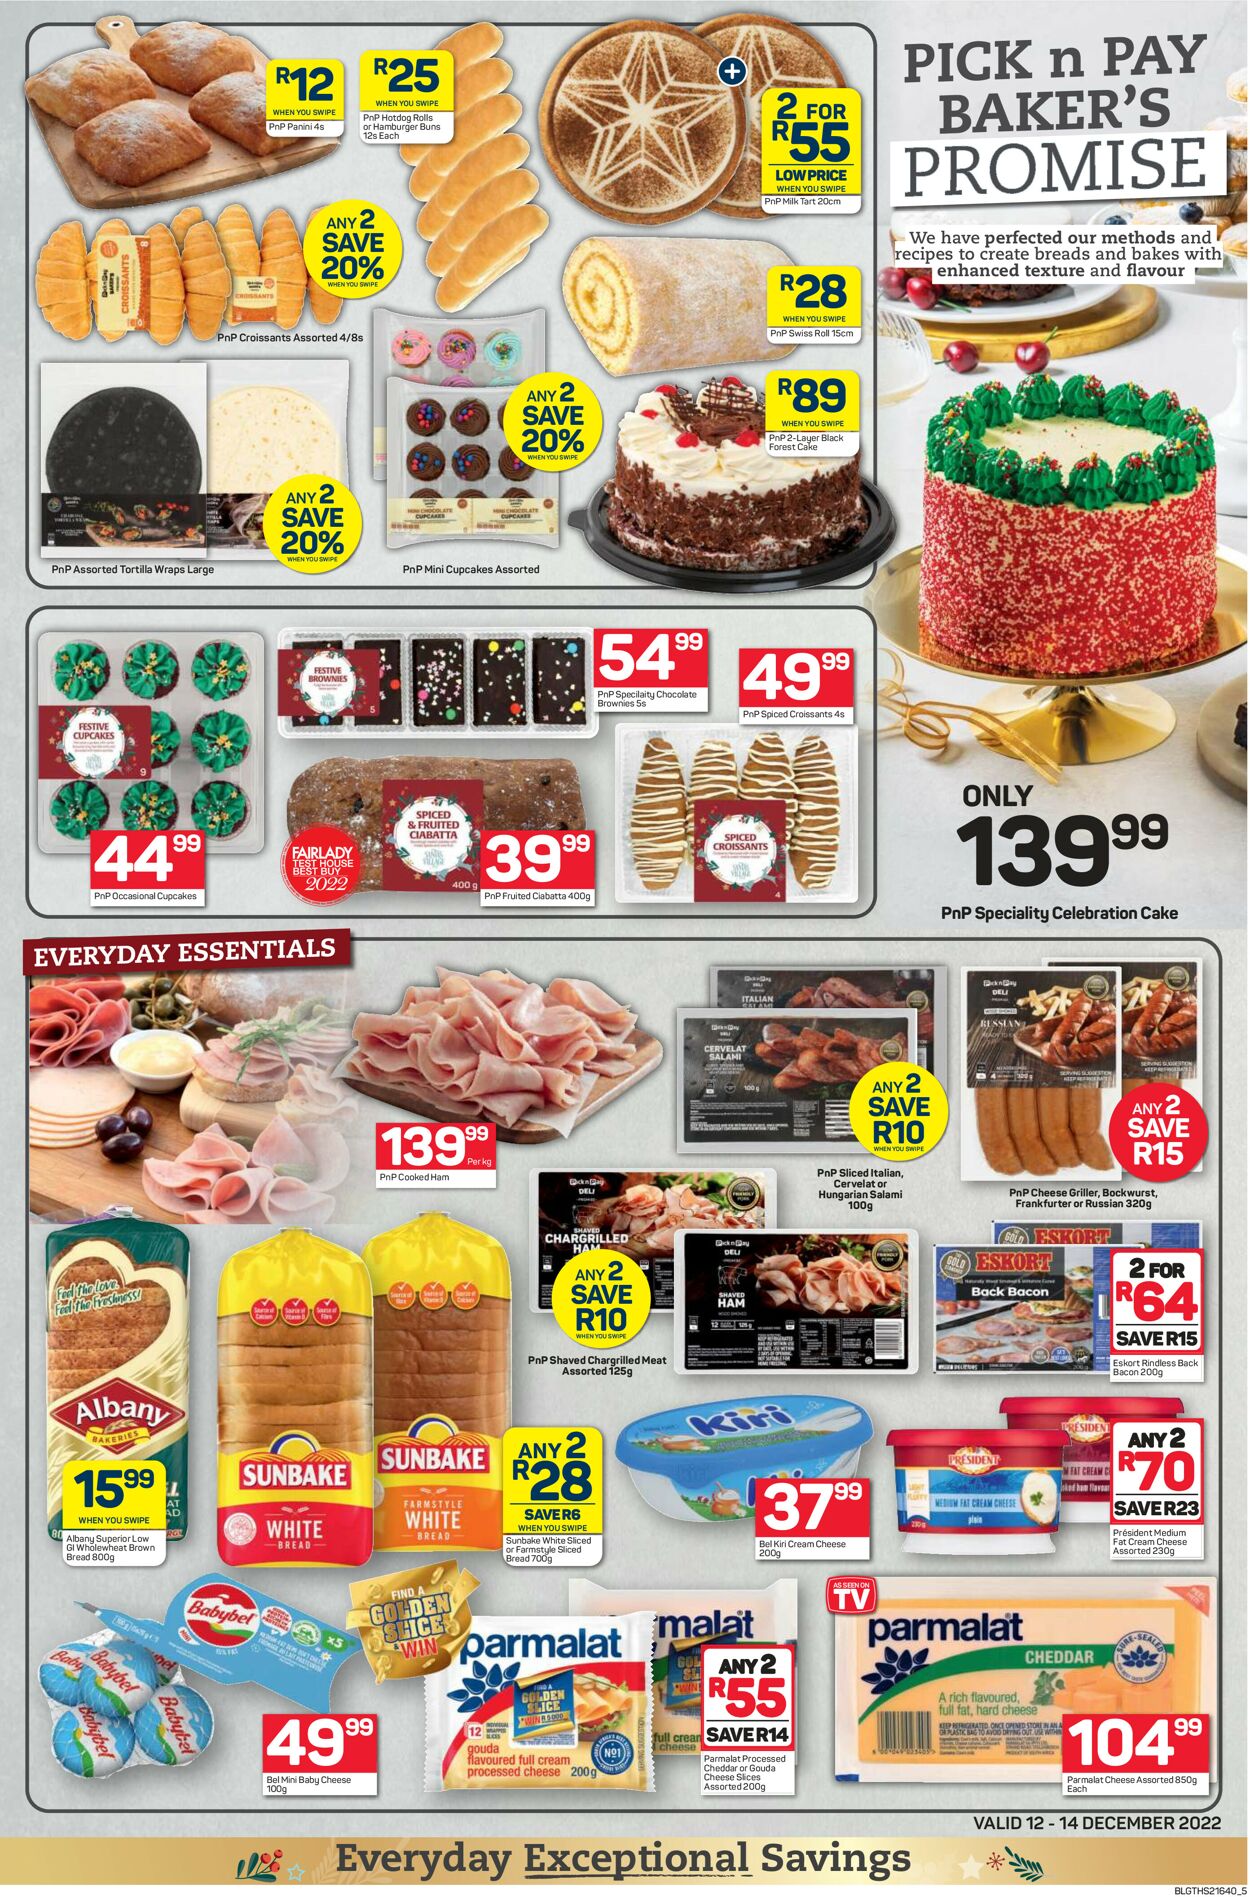 Pick n Pay Catalogue - 2022/12/12-2022/12/14 (Page 5)